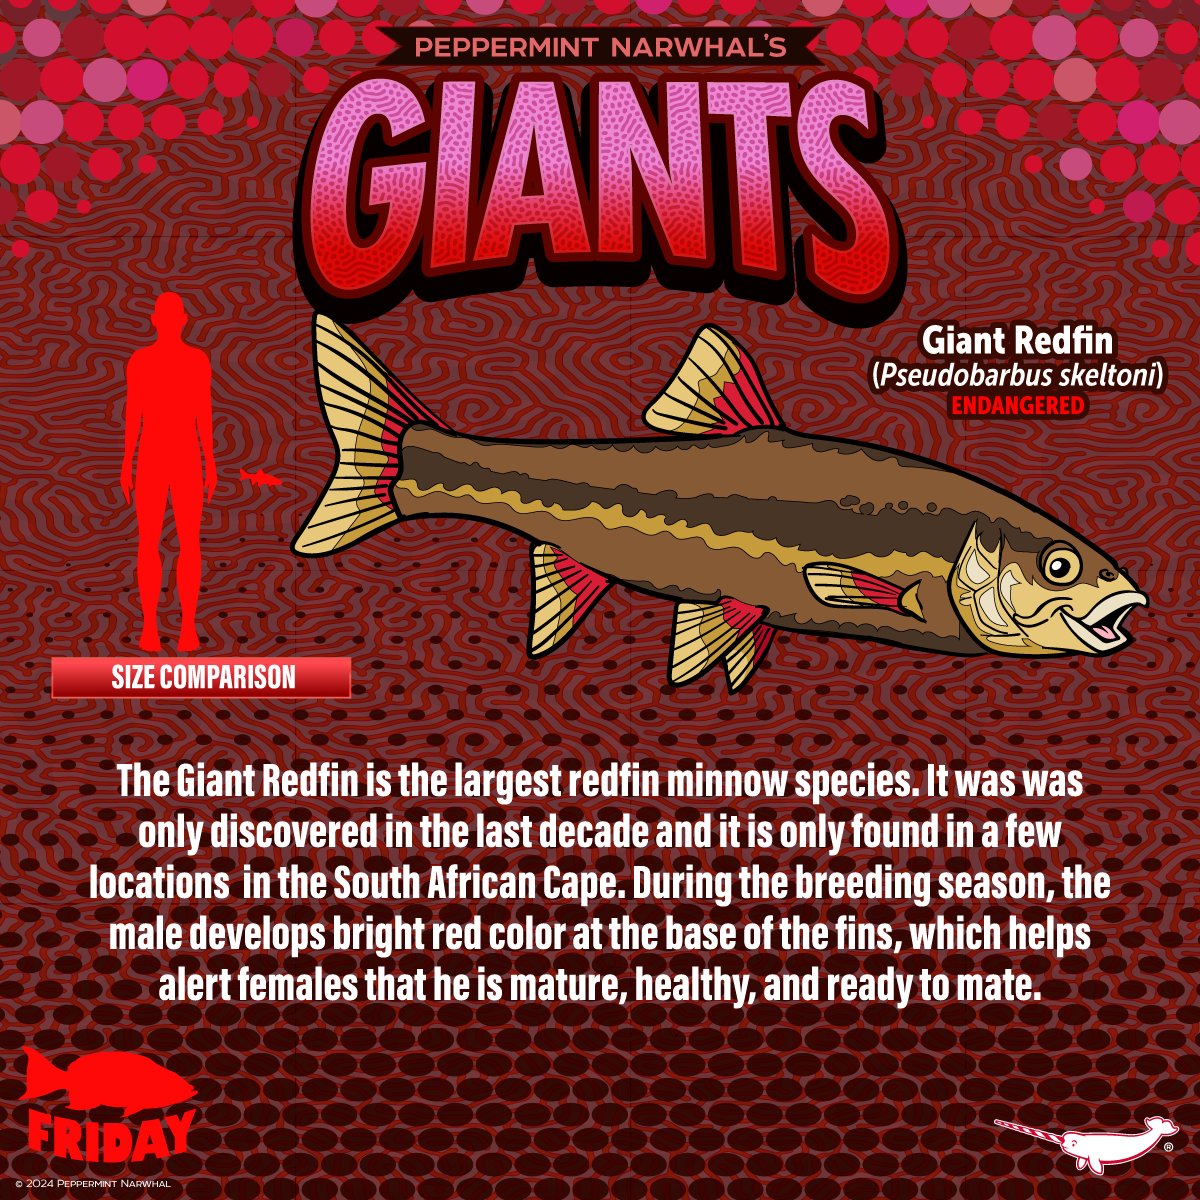 #GIANTS #GiantRedfin #FishFriday Shop #PeppermintNarwhal: peppermintnarwhal.com #Pseudobarbus #Minnow #Redfin #Fish